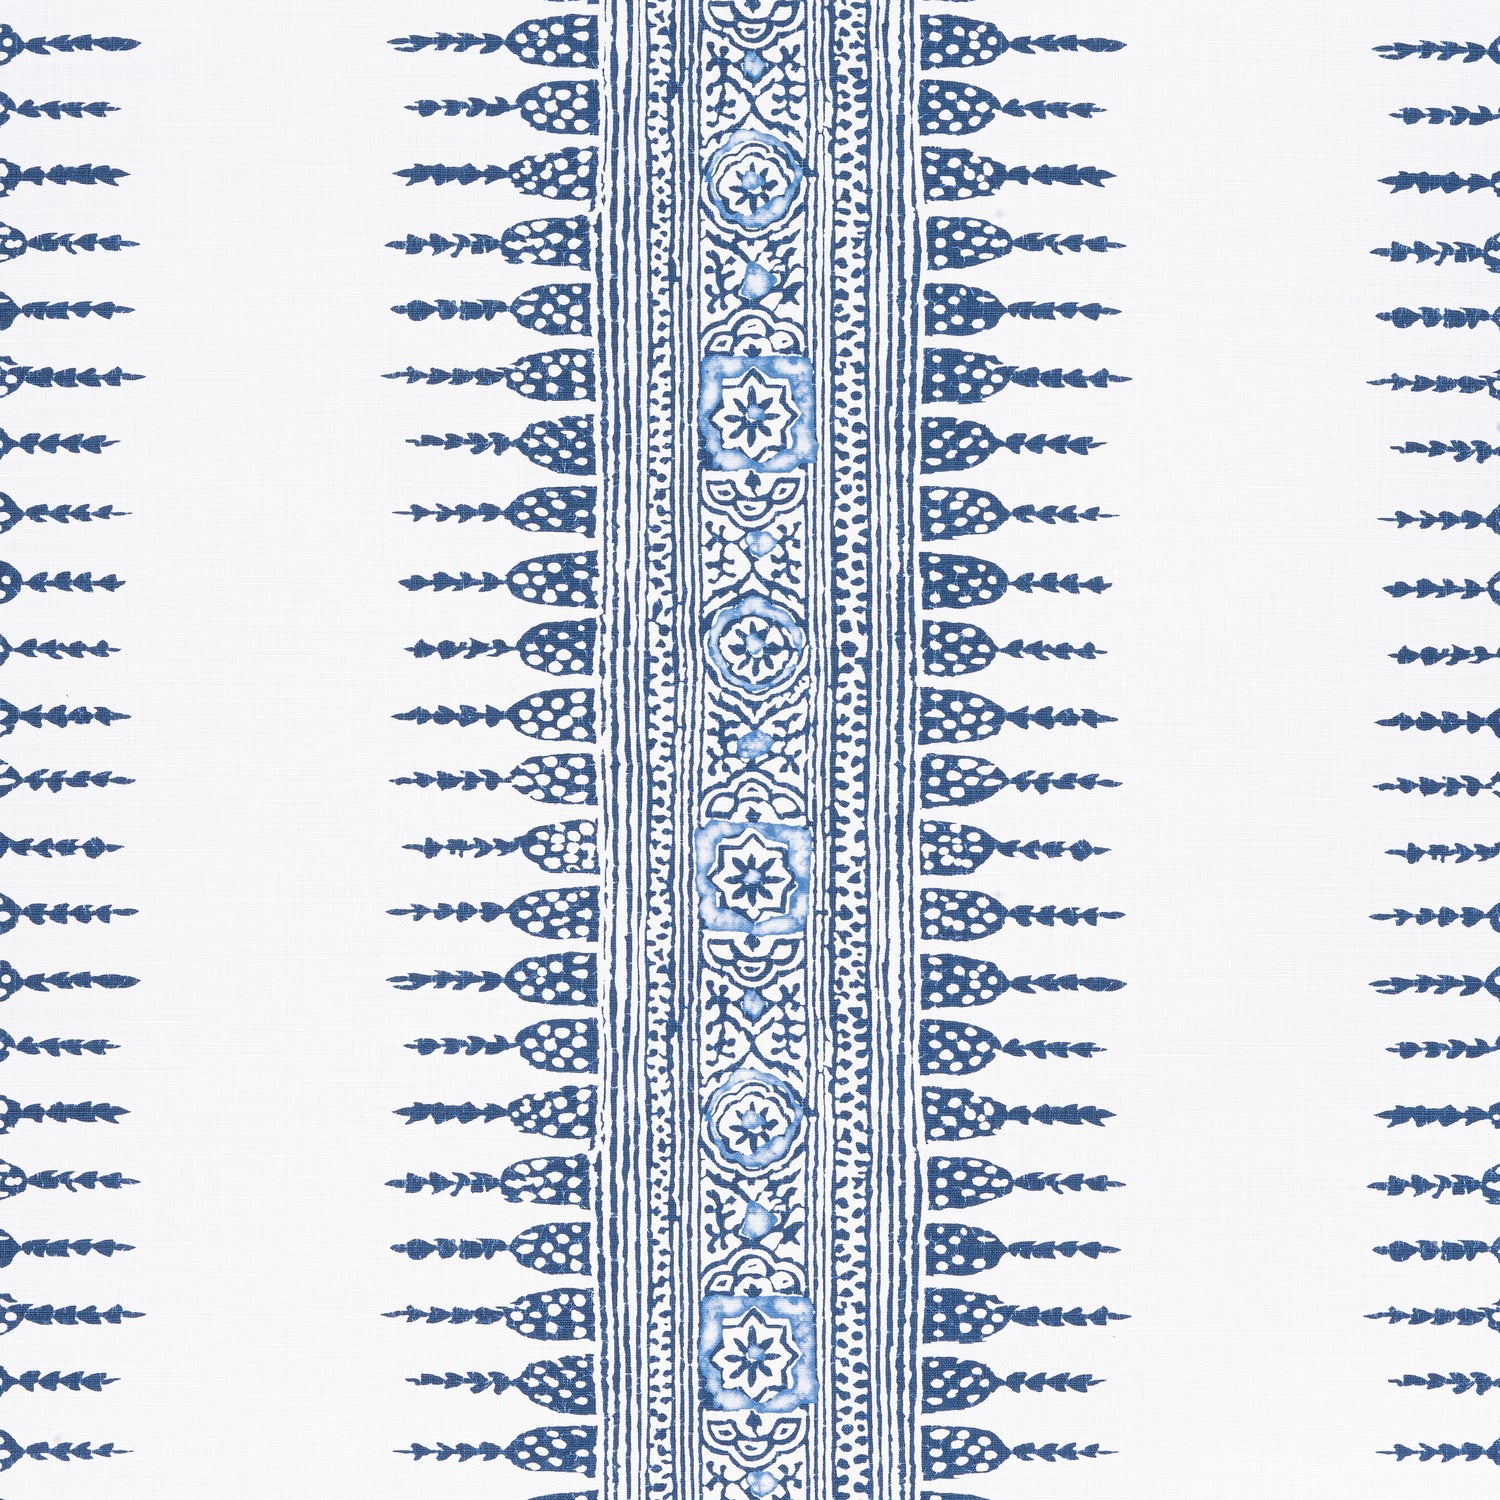 Javanese Stripe fabric in navy and white color - pattern number AF15137 - by Anna French in the Antilles collection